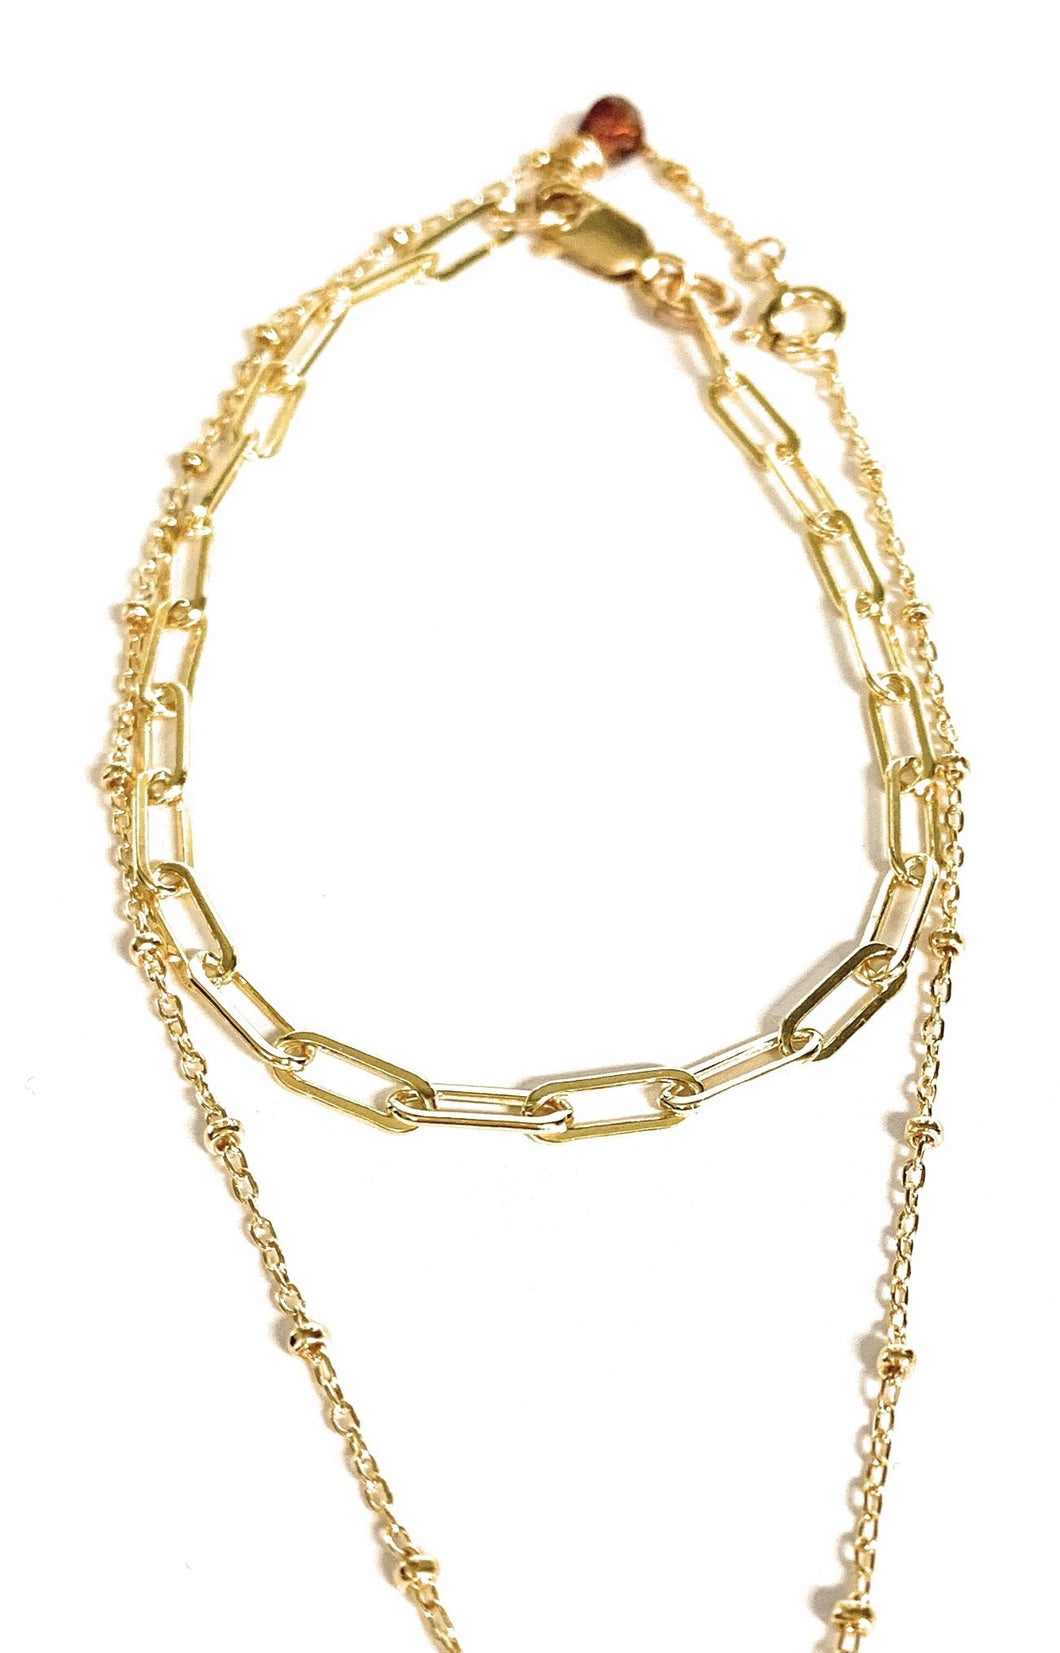 Gold Chain Link Necklace - MiShelli